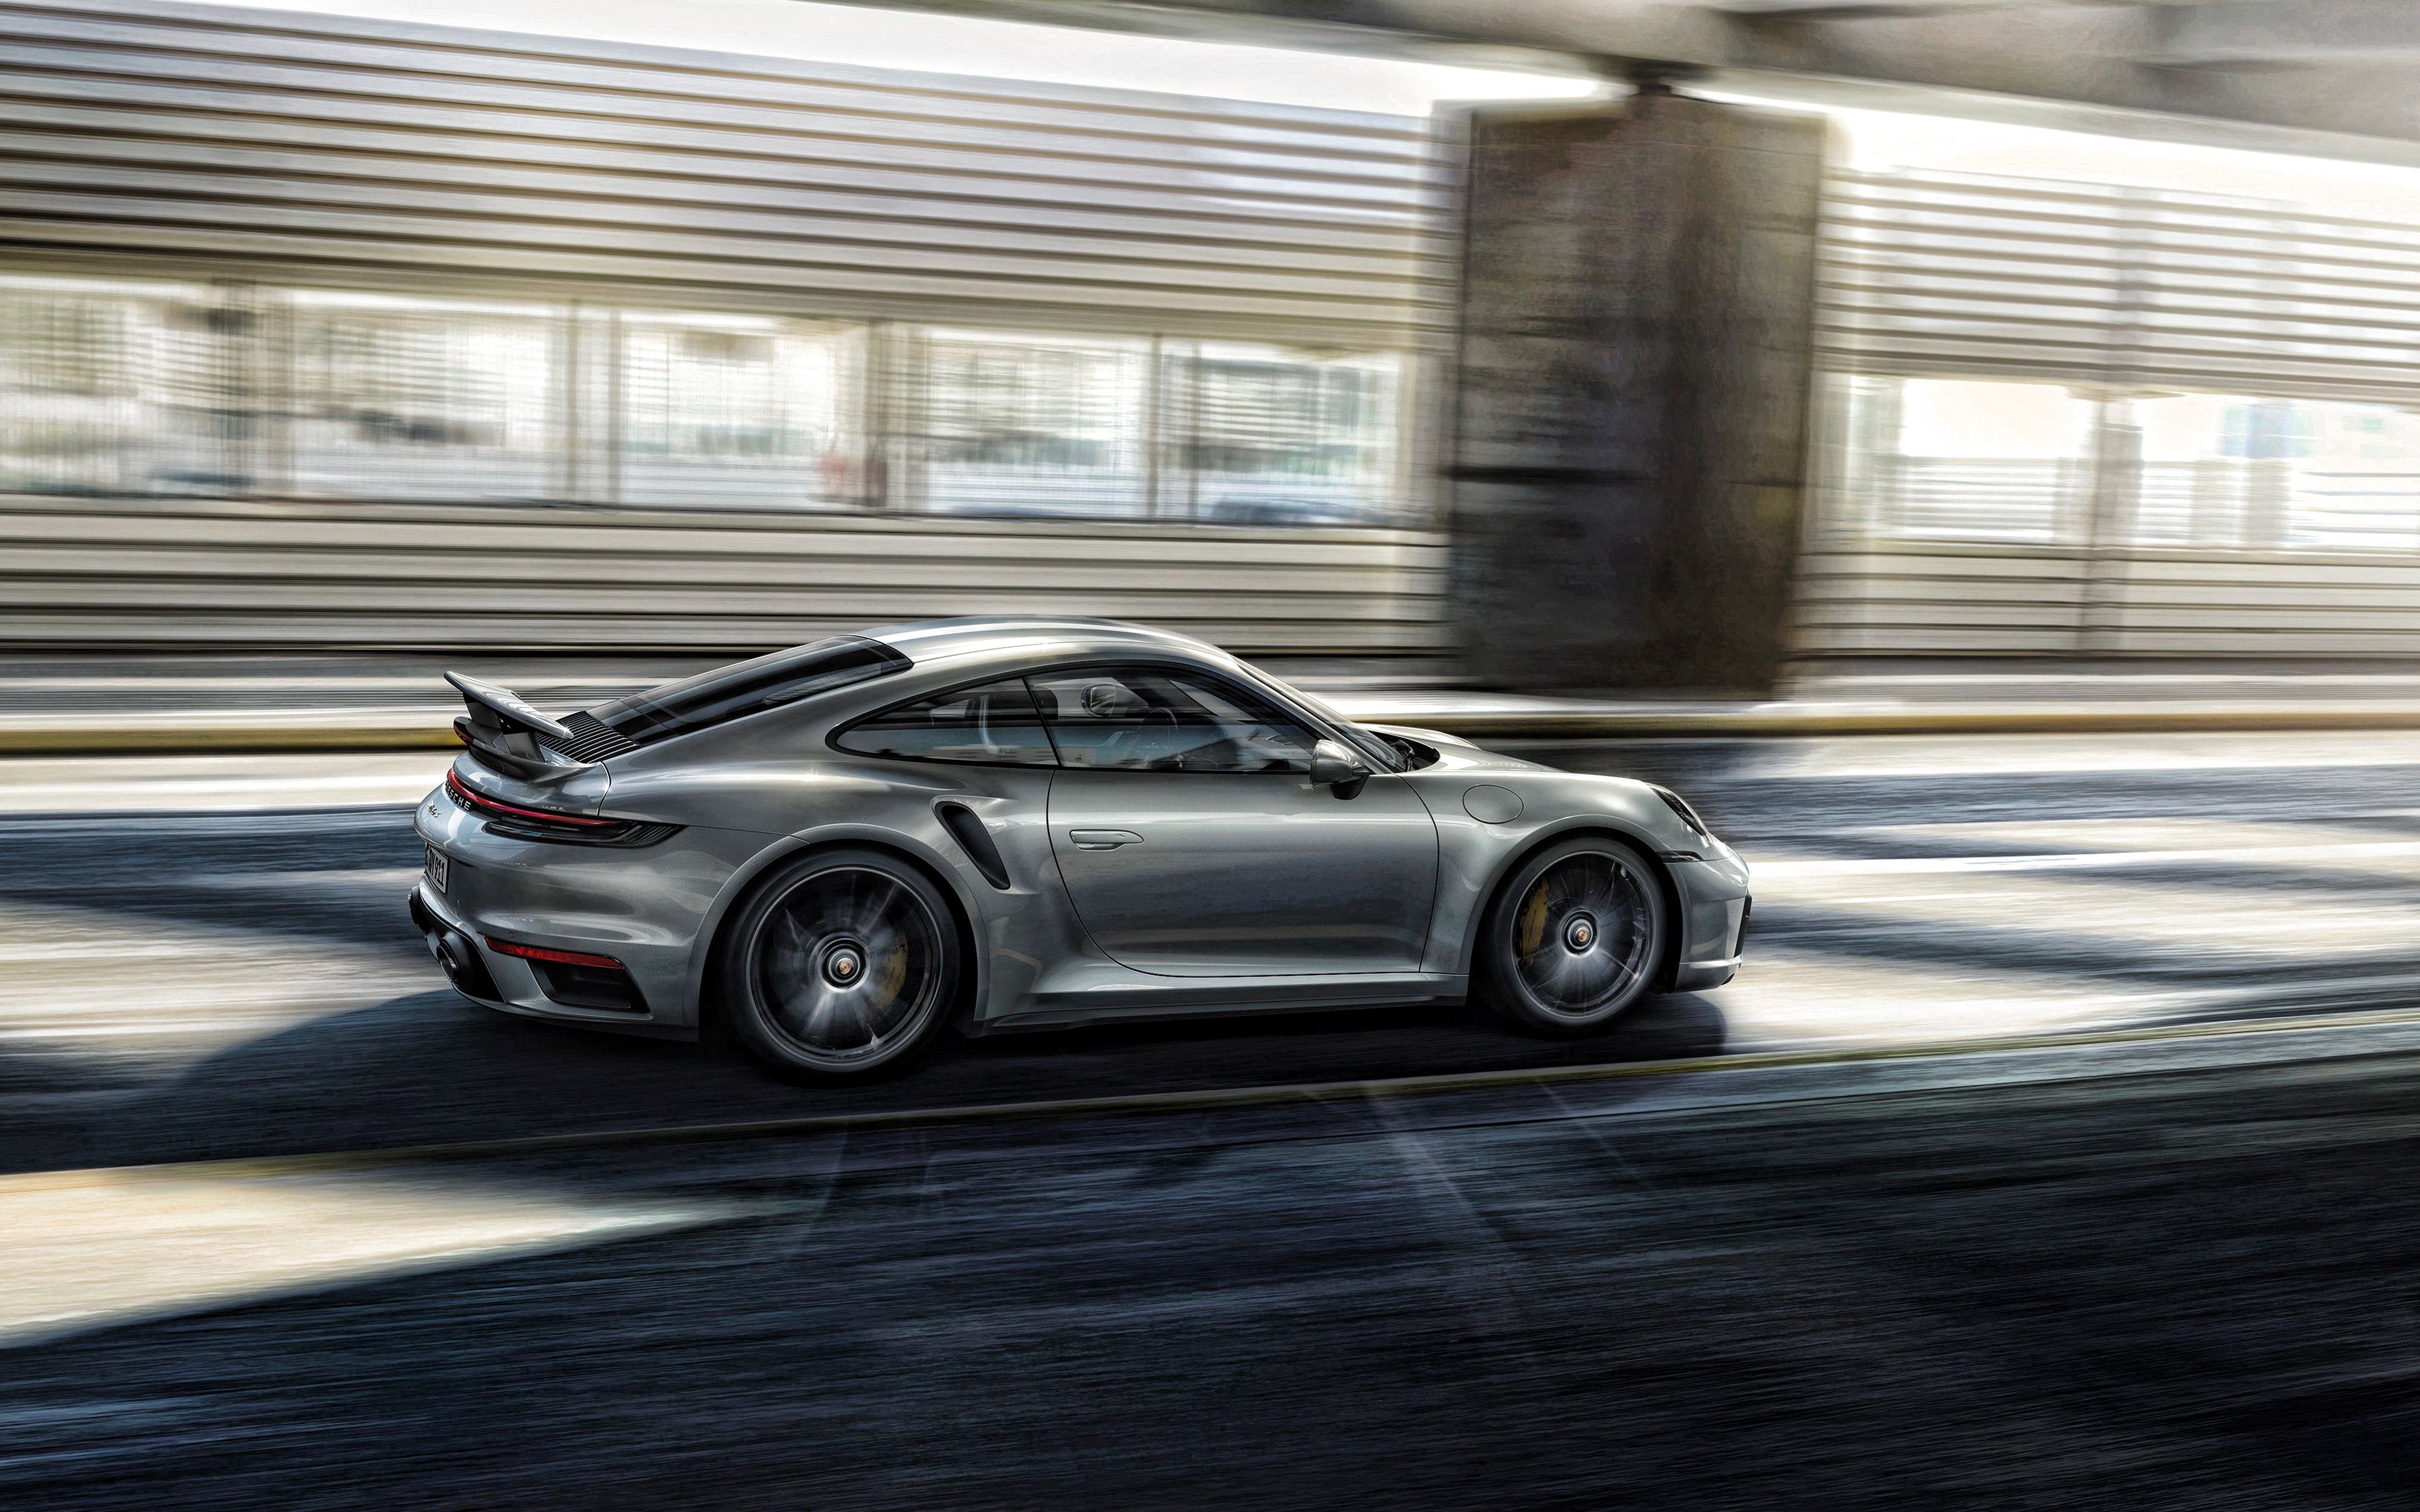 Download wallpaper Porsche 911 Turbo S, side view, exterior, silver sports coupe, new silver 911 Turbo S, German sports cars, Porsche for desktop with resolution 3840x2400. High Quality HD picture wallpaper